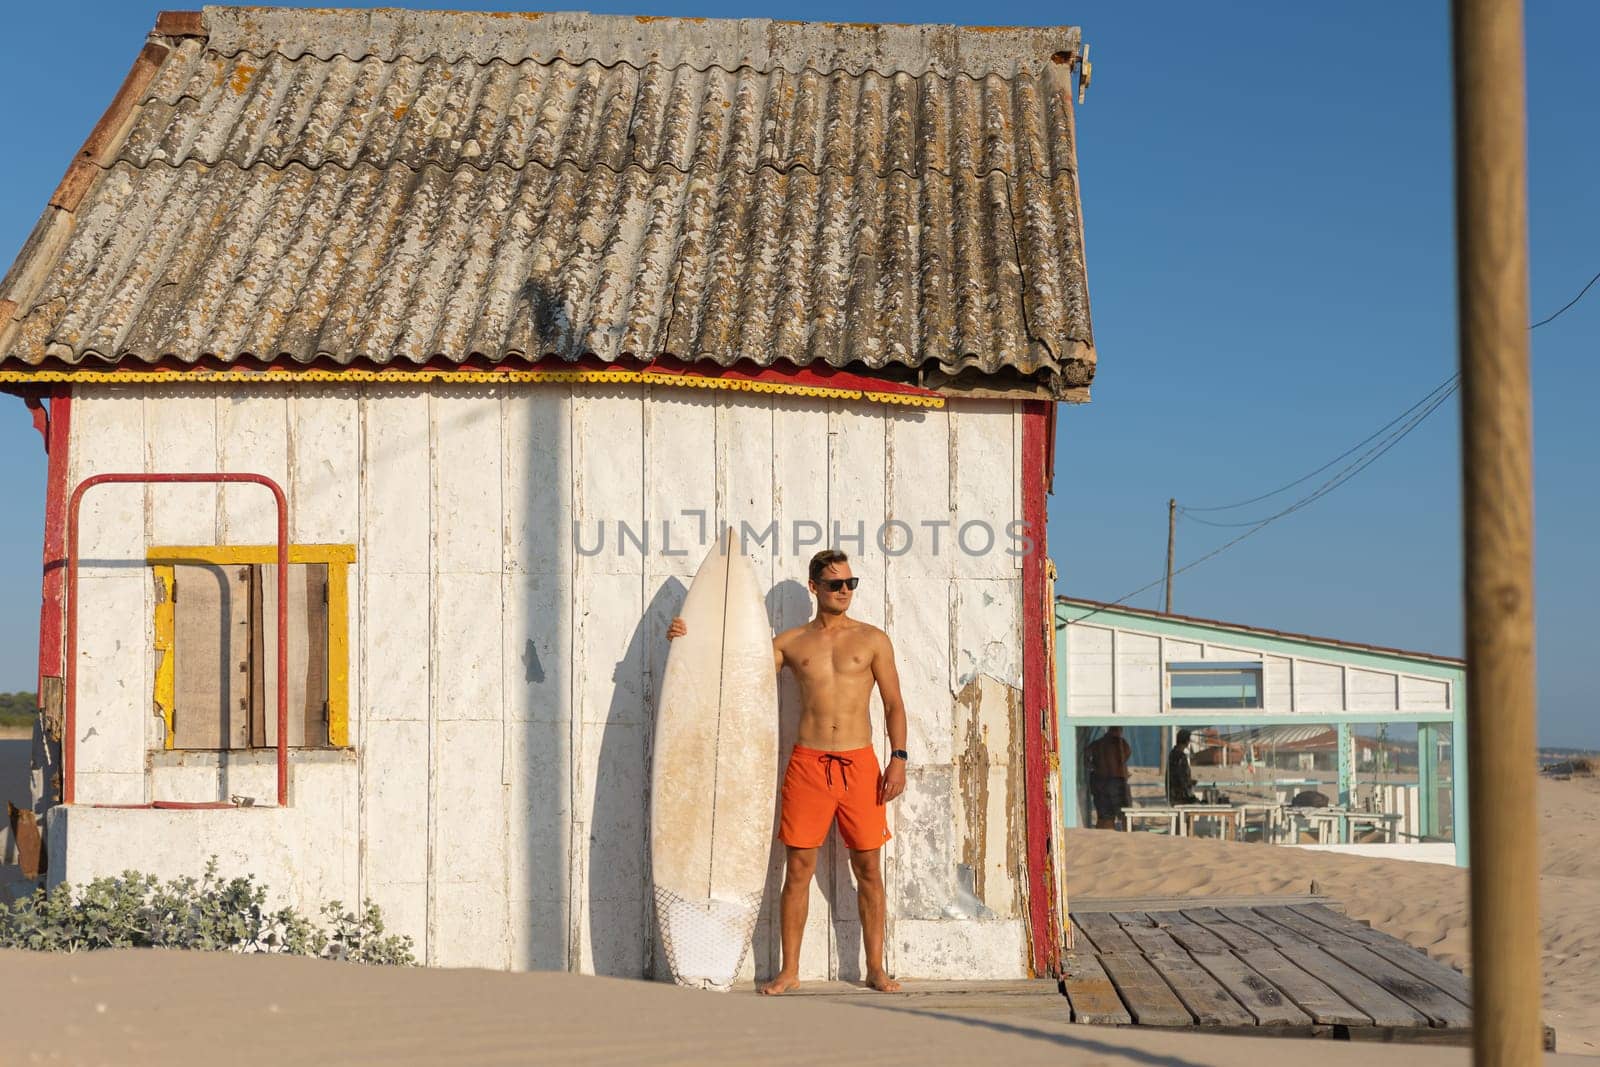 A man with nice athletic body standing at the shore house on the beach with his surfboard. Mid shot